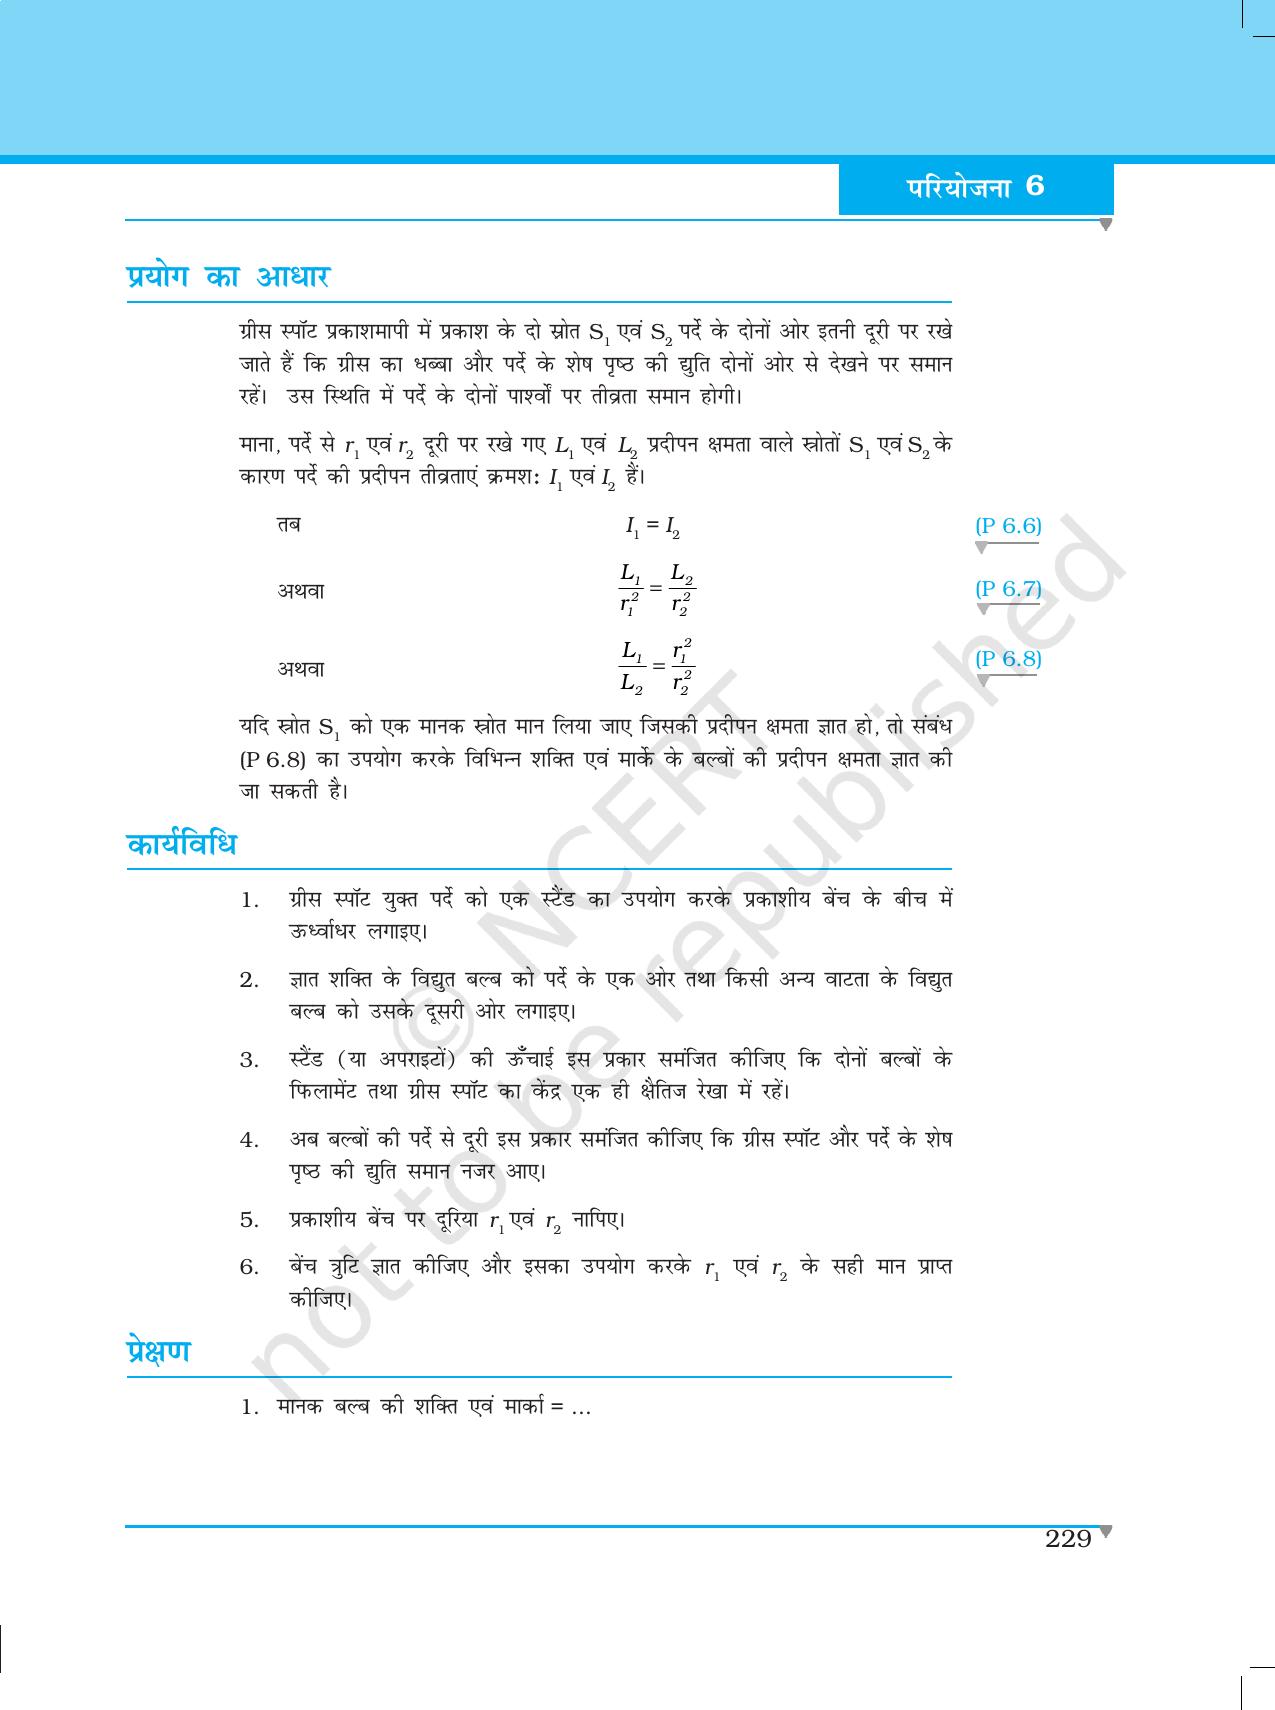 NCERT Laboratory Manuals for Class XII भौतिकी - परियोजना (1 - 7) - Page 23